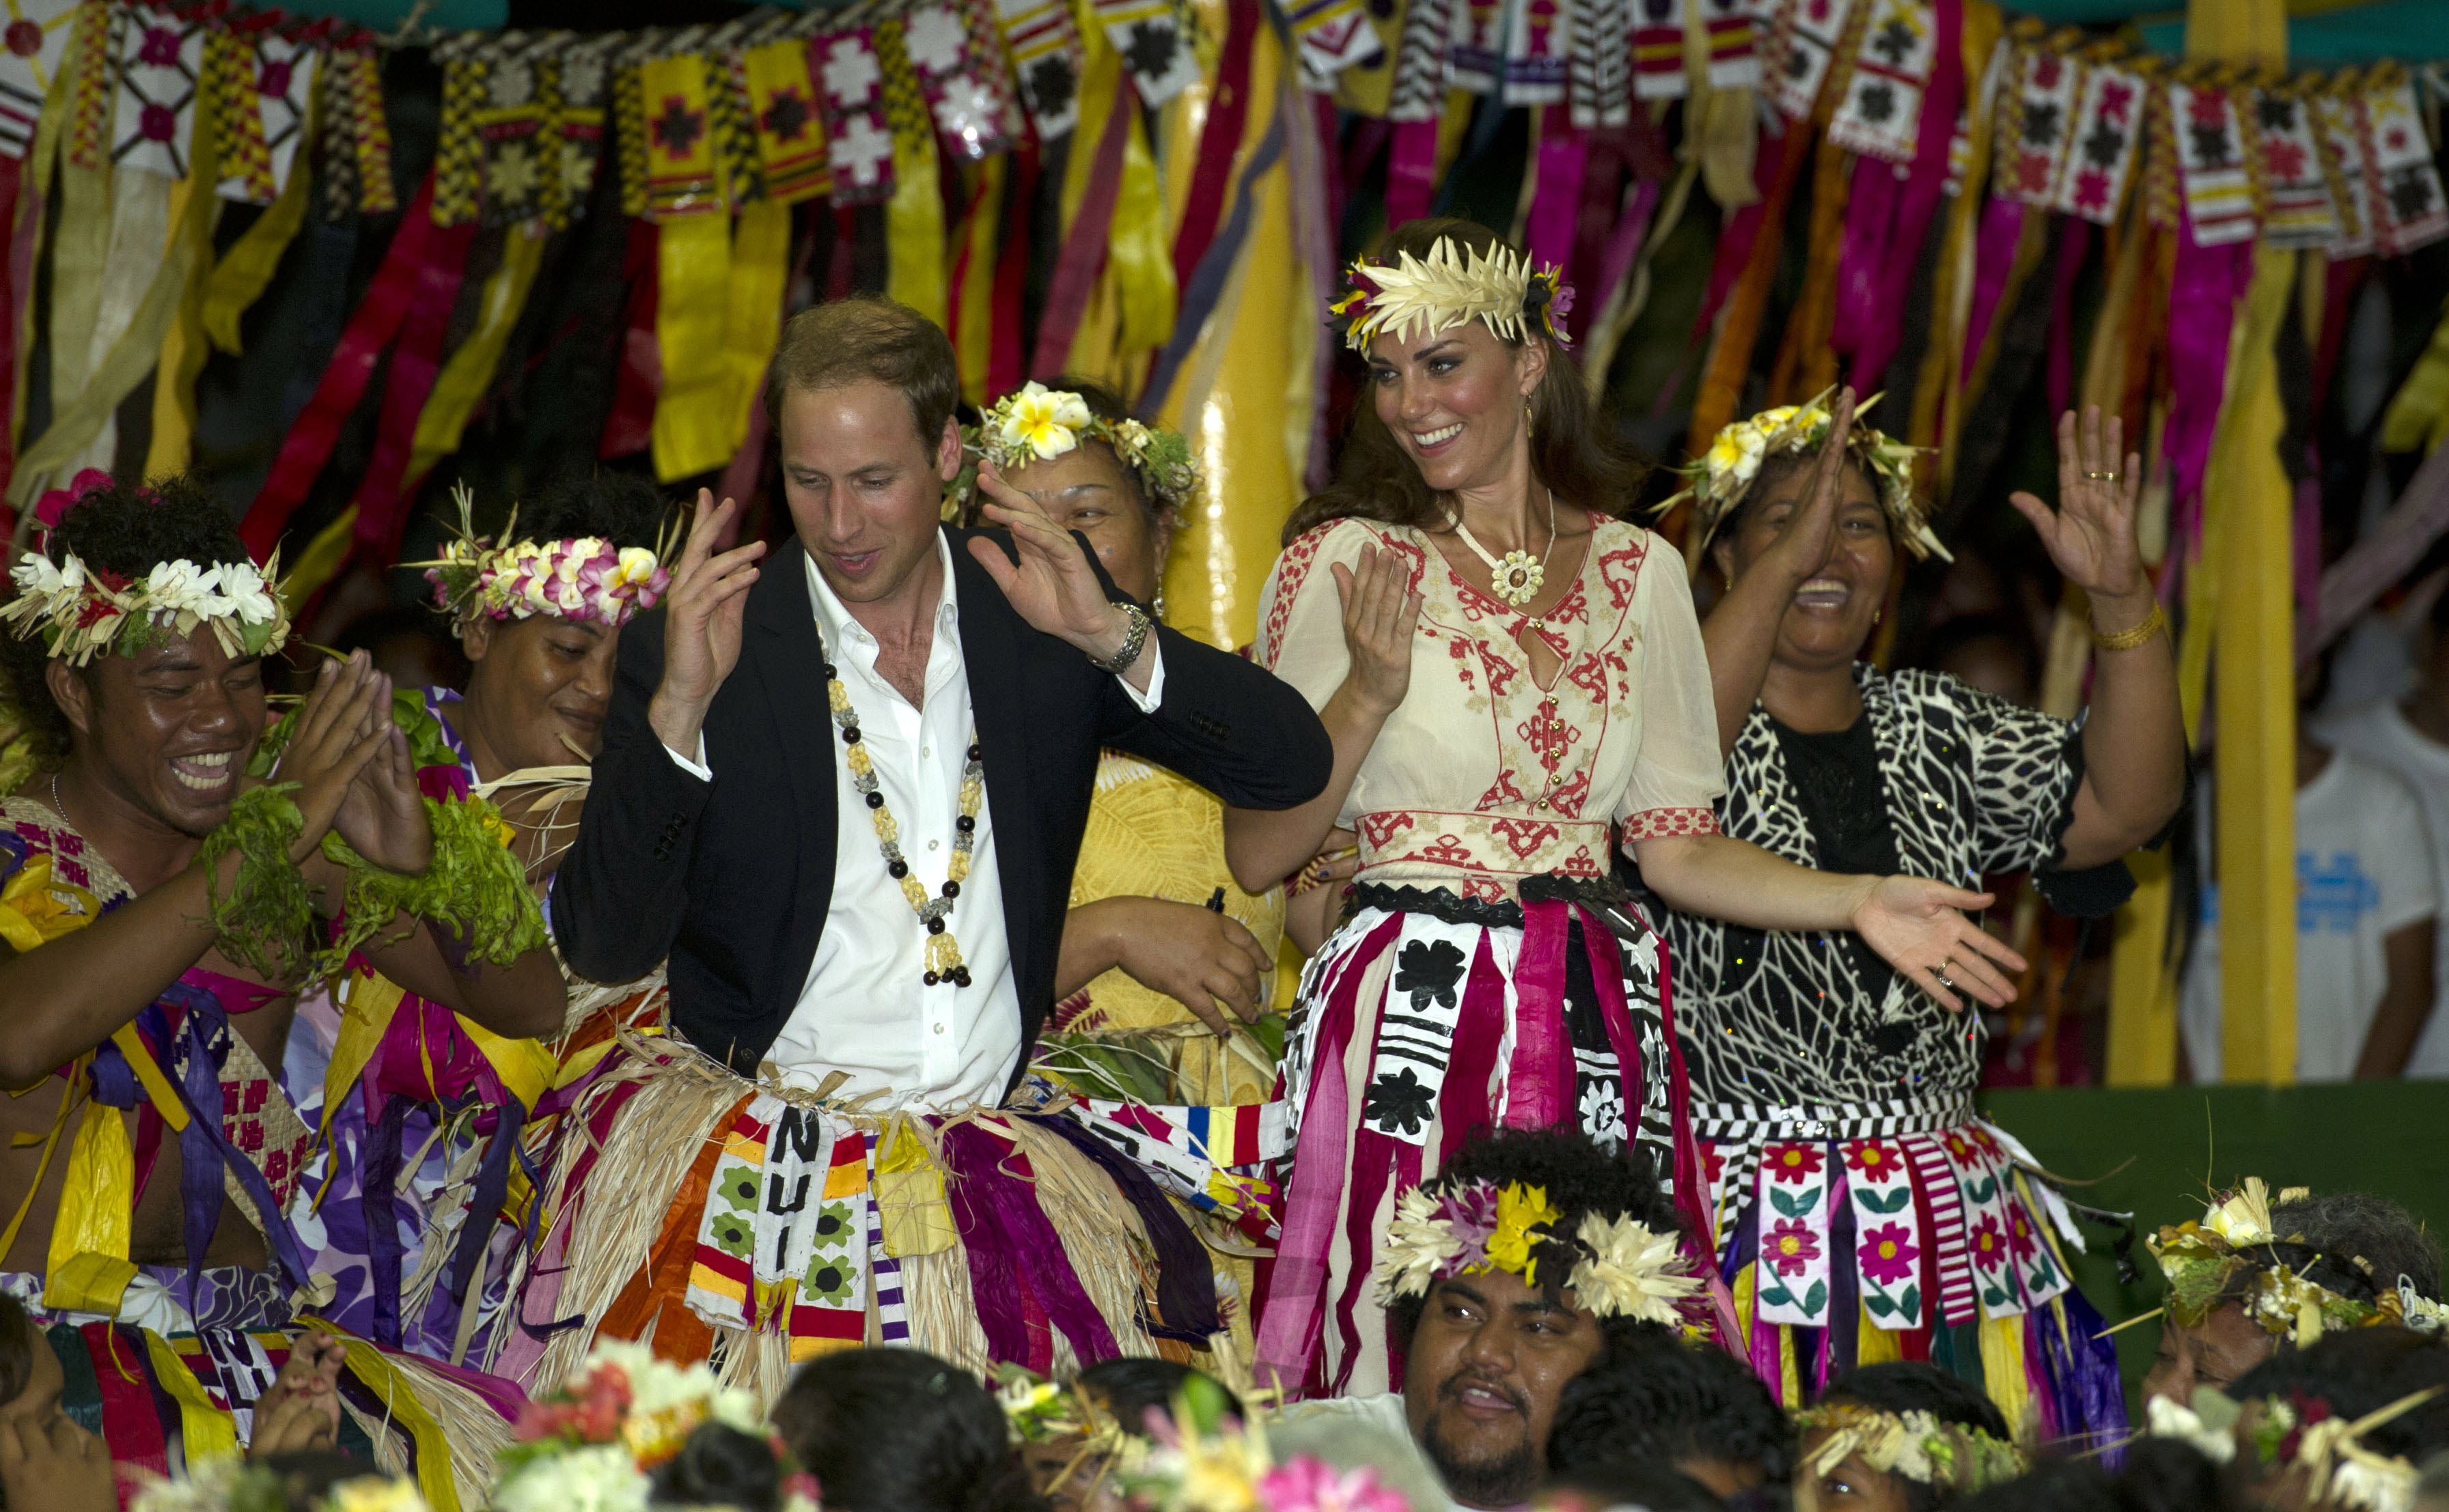 Prince William, Duke of Cambridge and Catherine, Duchess of Cambridge and dance with local ladies at a Vaiku Falekaupule Ceremony during the Royal couple's Diamond Jubilee tour of the Far East on September 18, 2012 in Funafuti, Tuvalu. (Samir Hussein—WireImage)